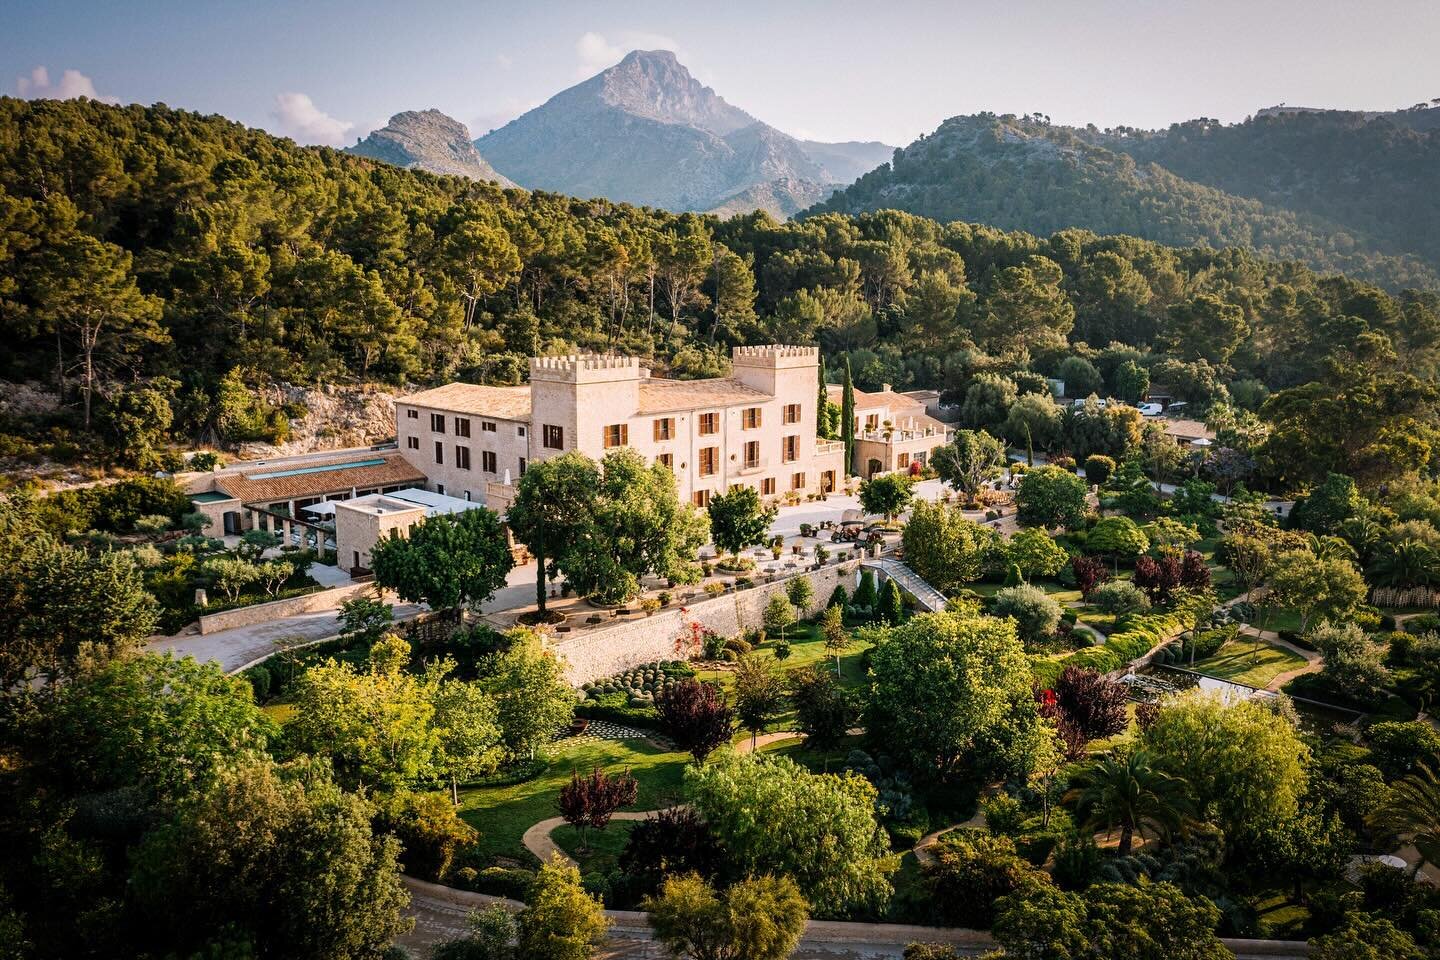 If you are still looking for a truly unique place to stay, our outstanding partner hotel @castellsonclaret is only a three-minute ride away from our base in Es Capdella. Just contact us to find out more about our preferential rates we can offer you f